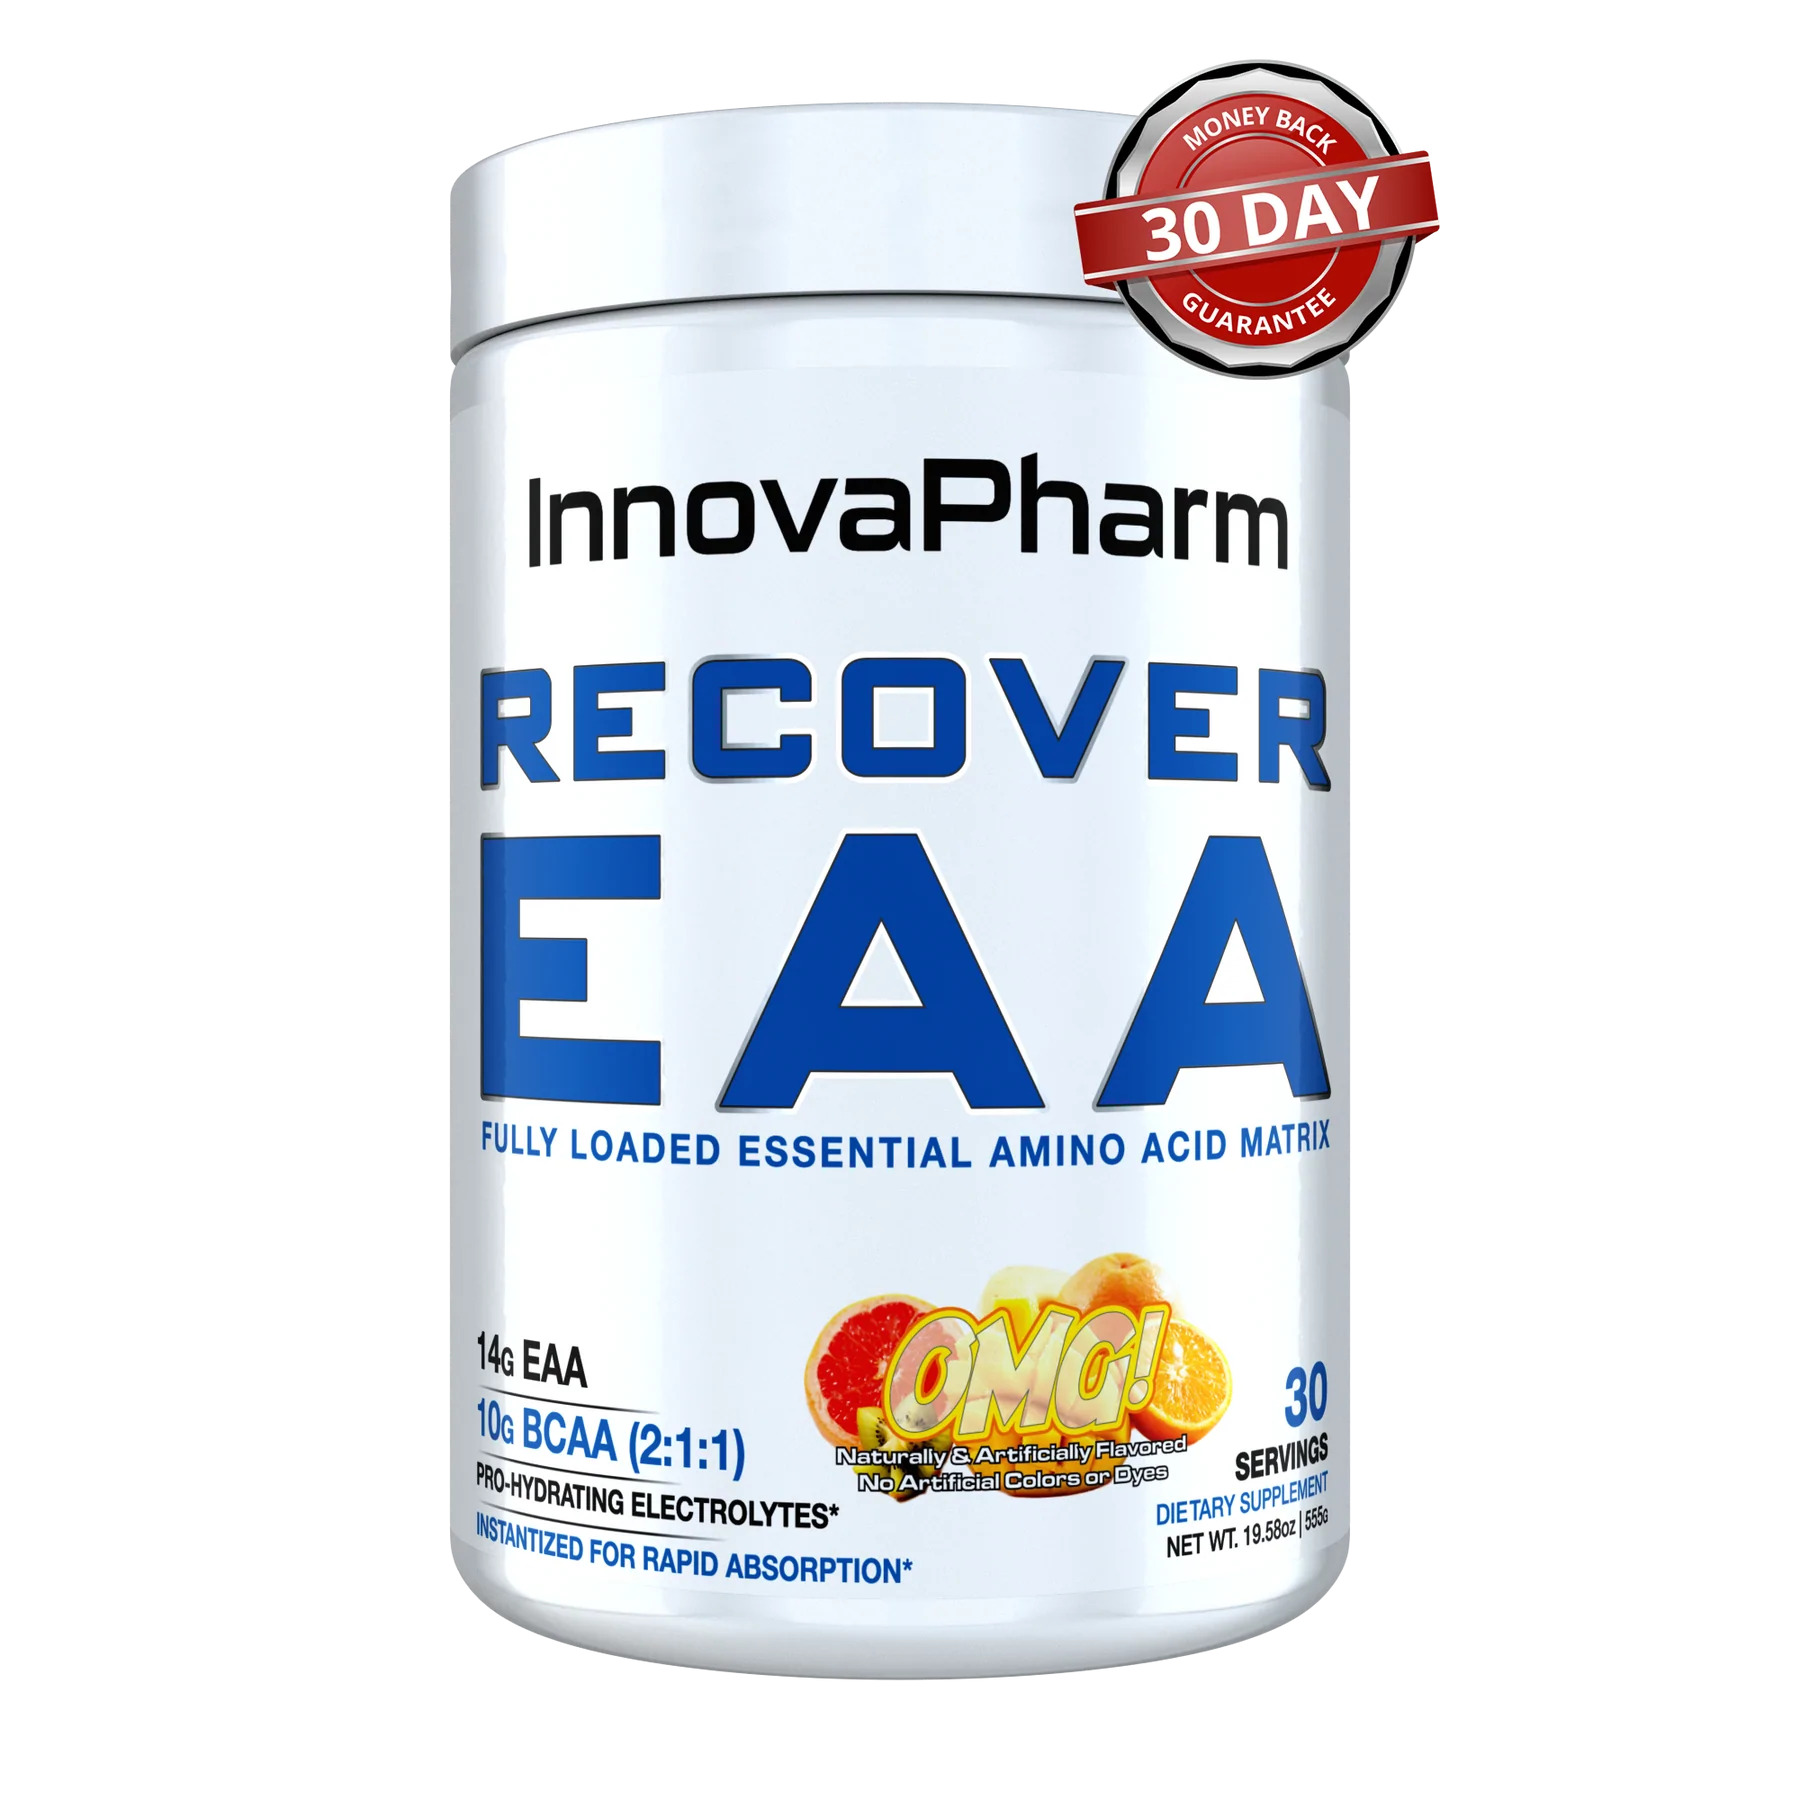 InnovaPharm Recover EAA (BCAA and EAA Intra Workout)